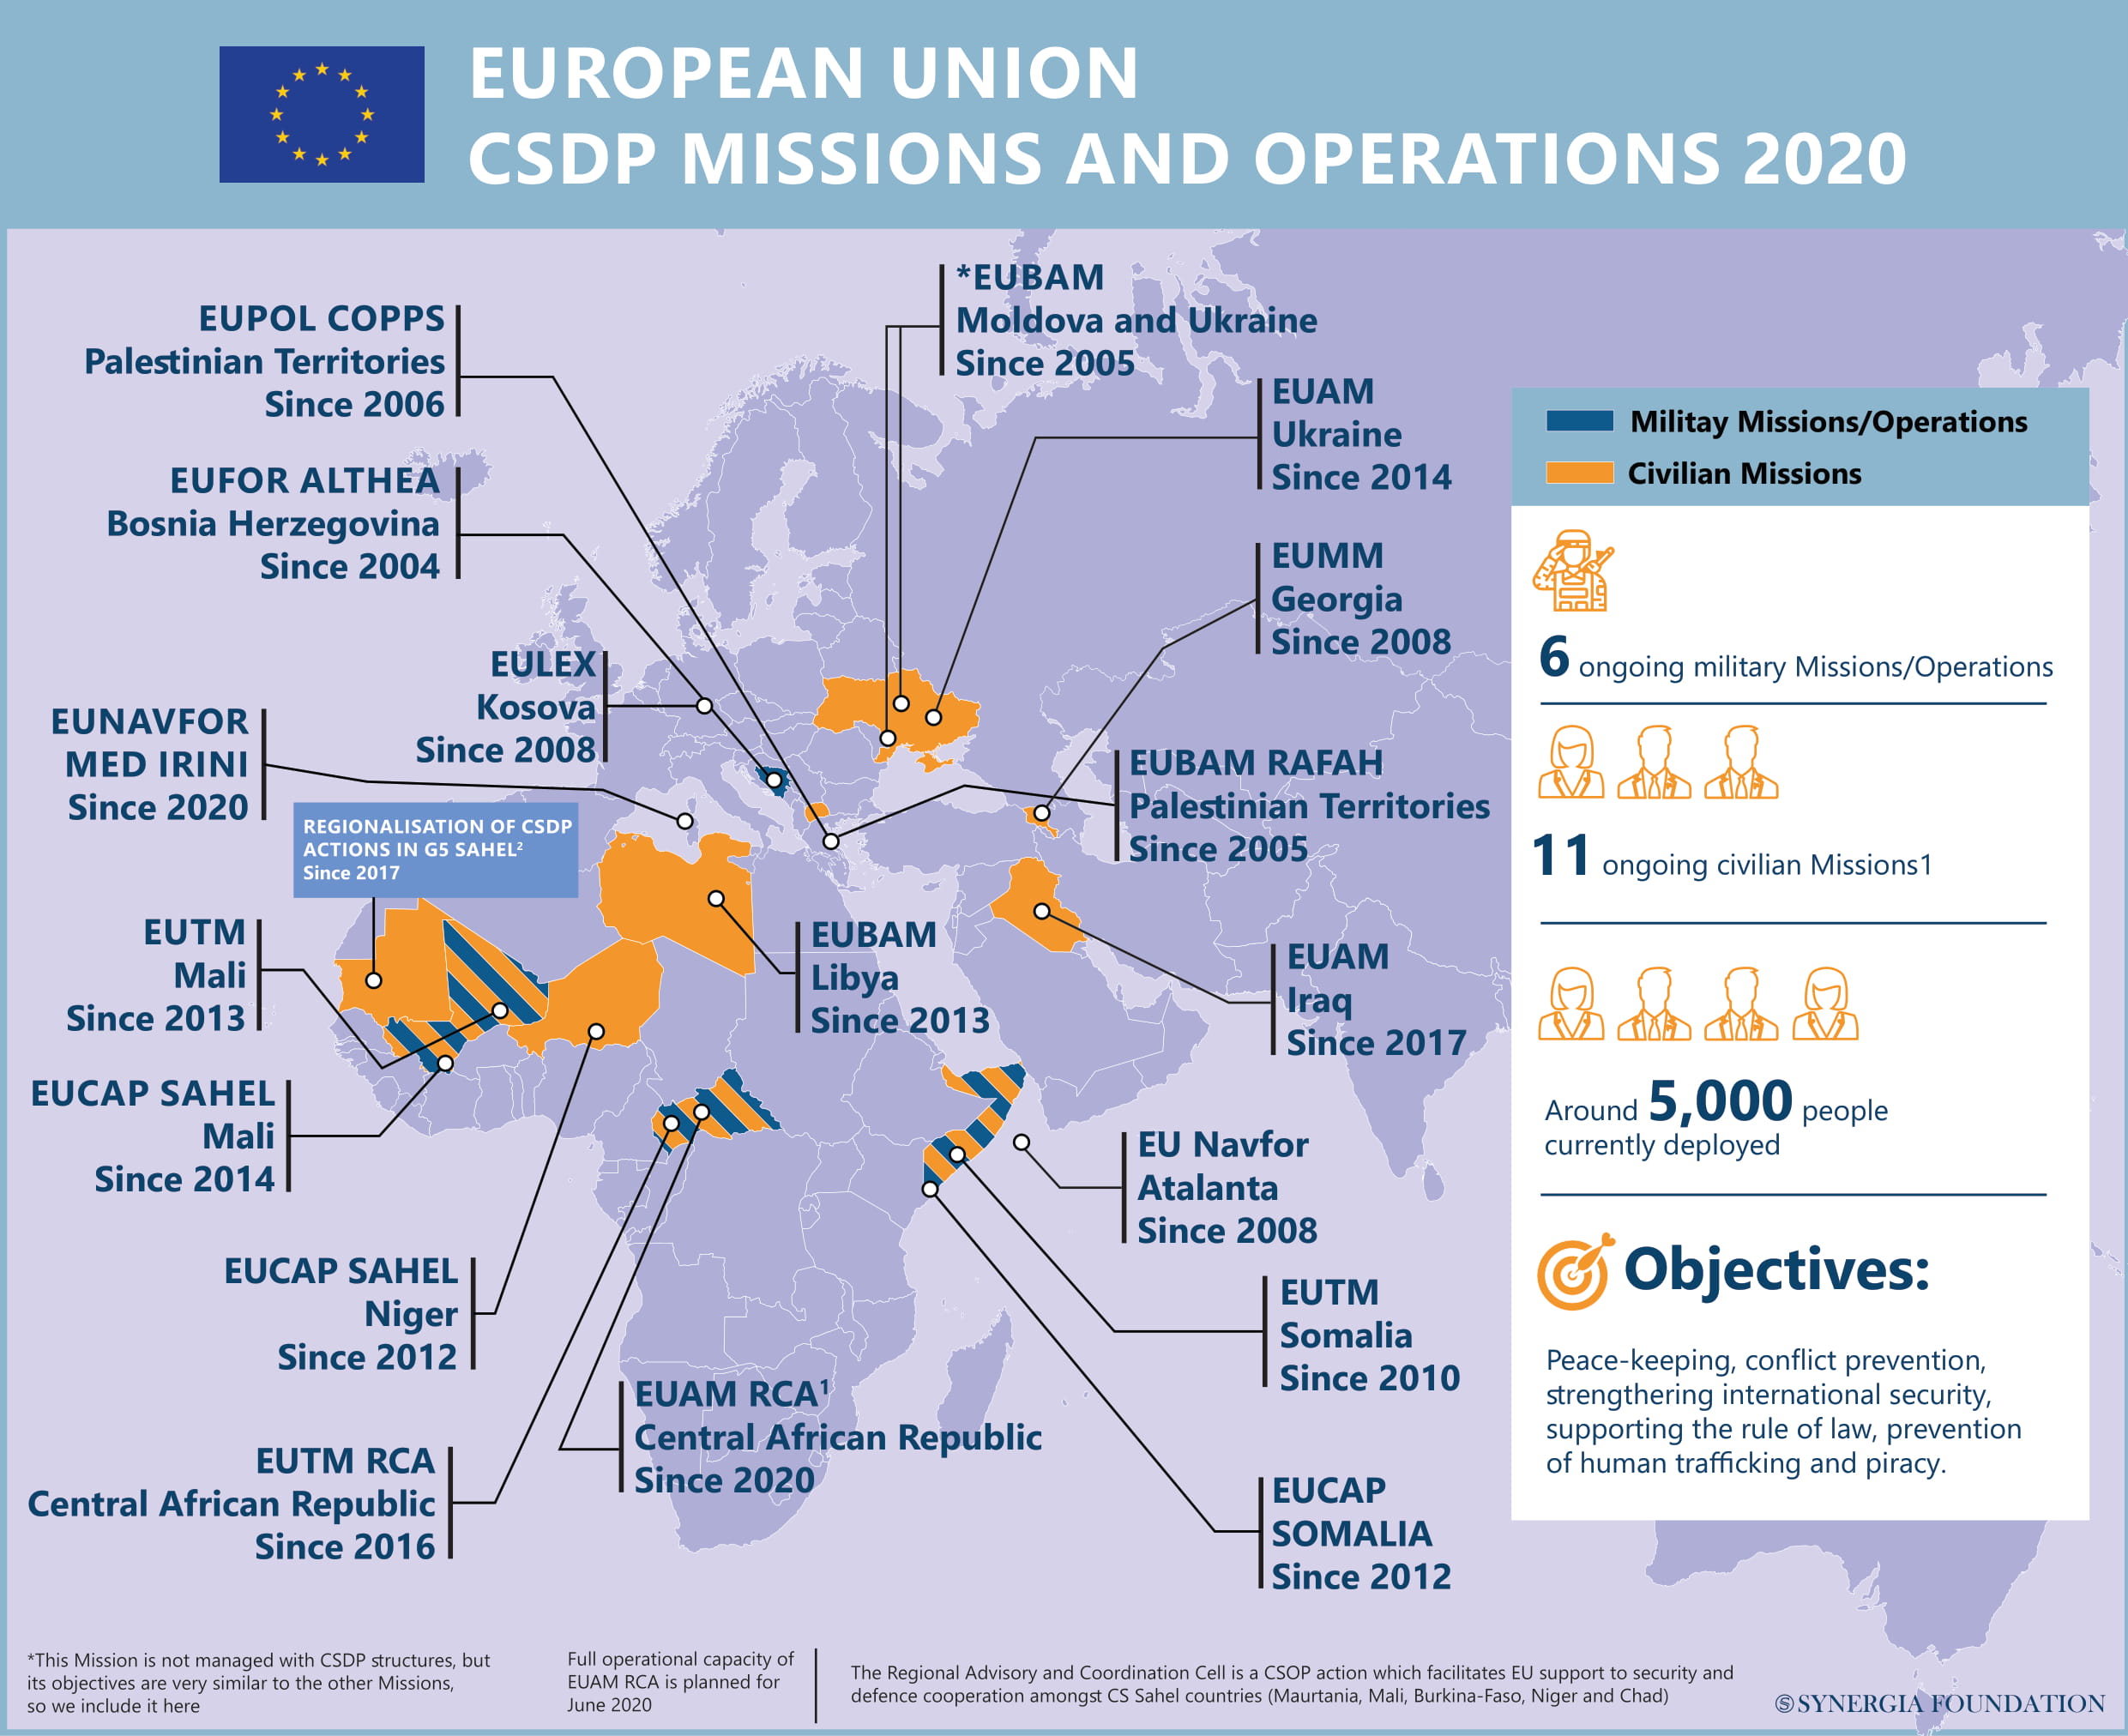 EUROPEAN UNION CSDP MISSIONS AND OPERATIONS 2020